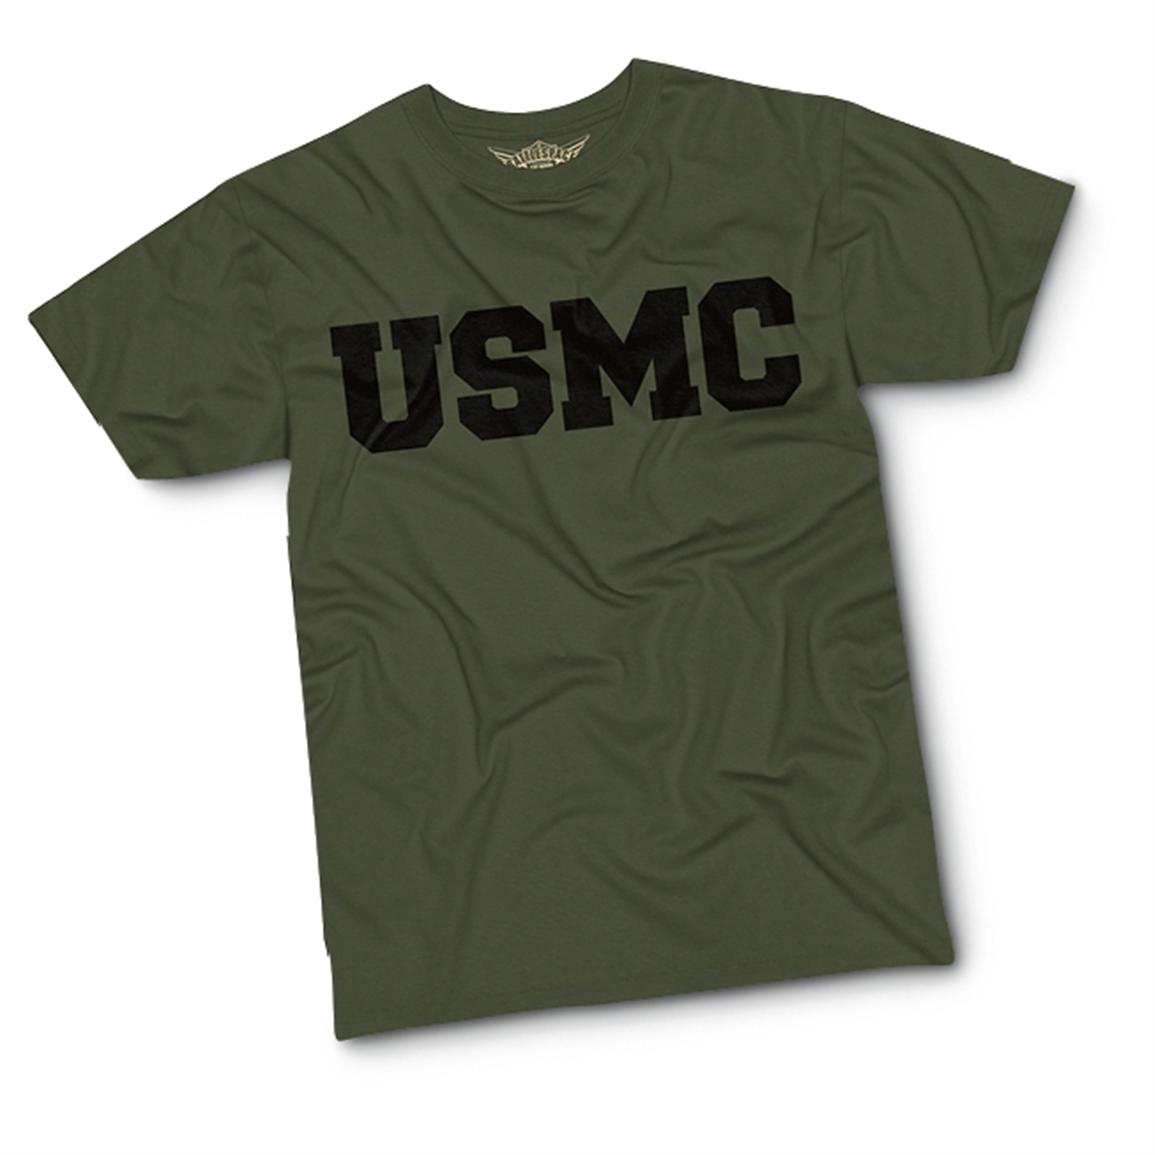 3 Service Branch T - shirts - 204108, T-Shirts at Sportsman's Guide